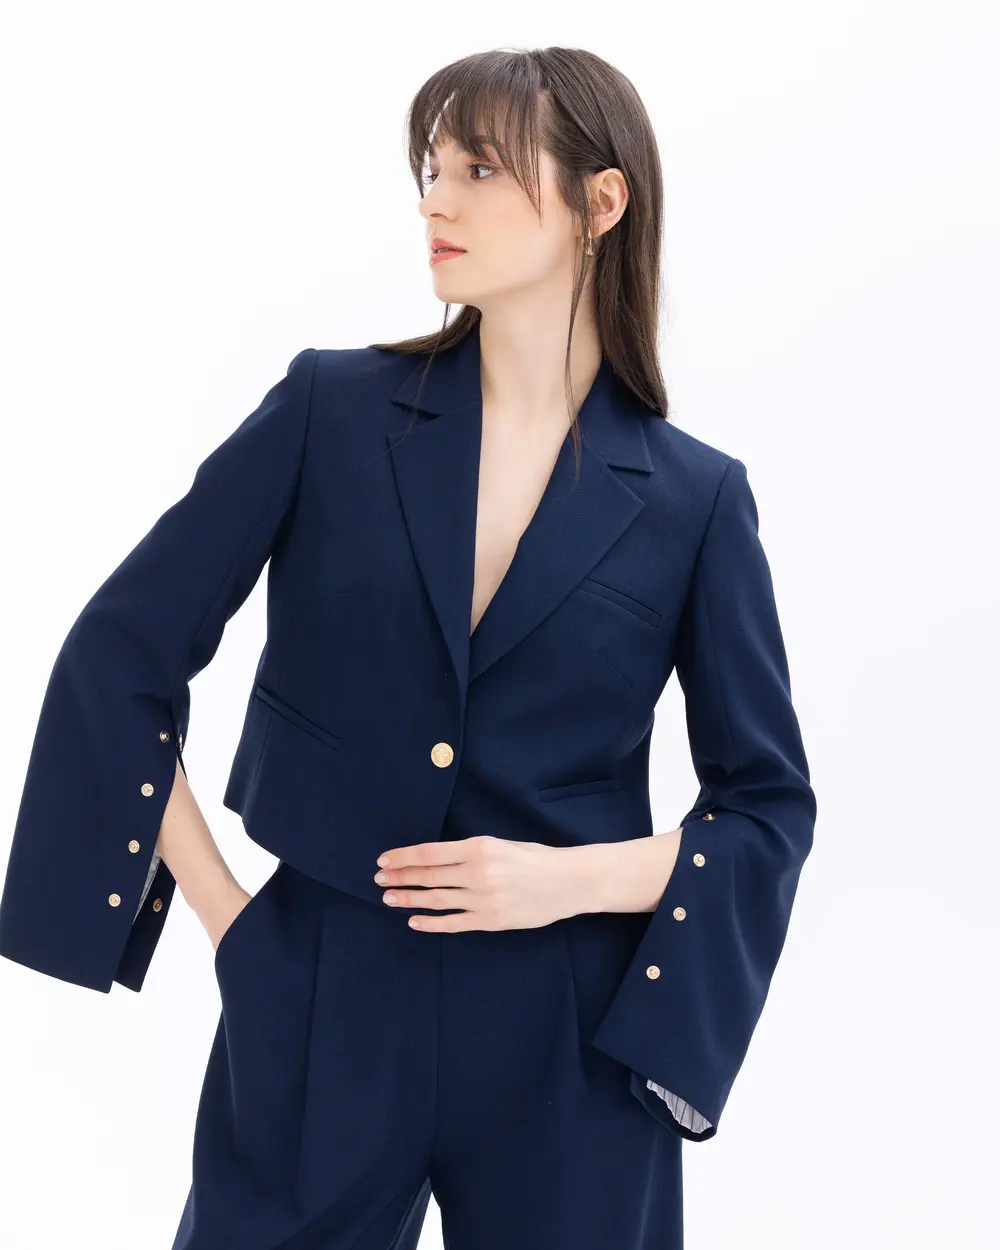 Waist Length Jacket with Button Detail